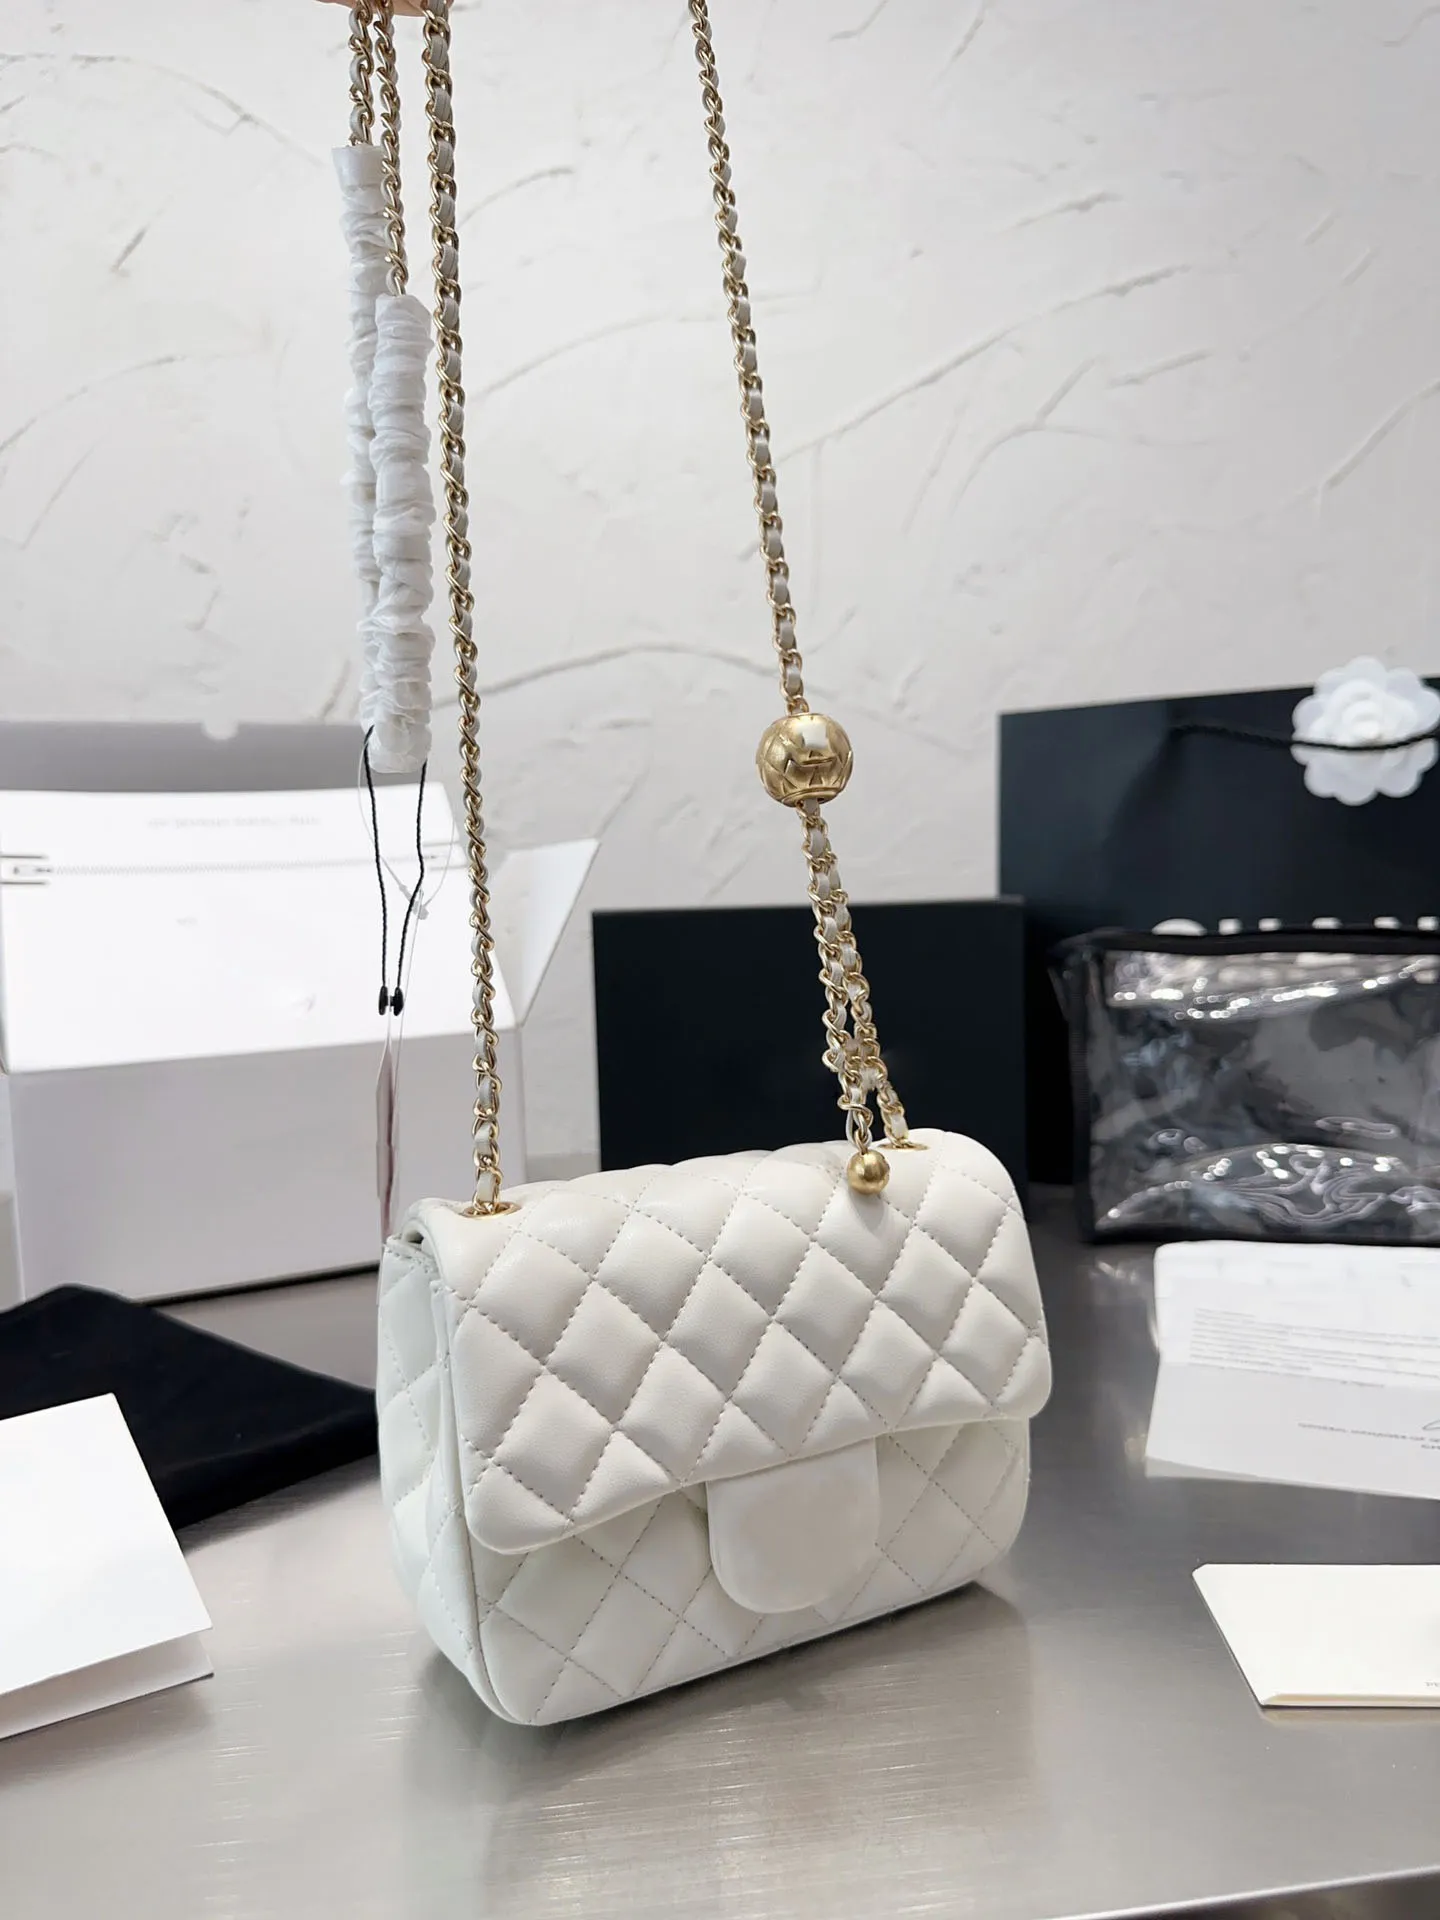 Buy White Crystal Round Shaped Ball Bag by BAG HEAD Online at Aza Fashions.